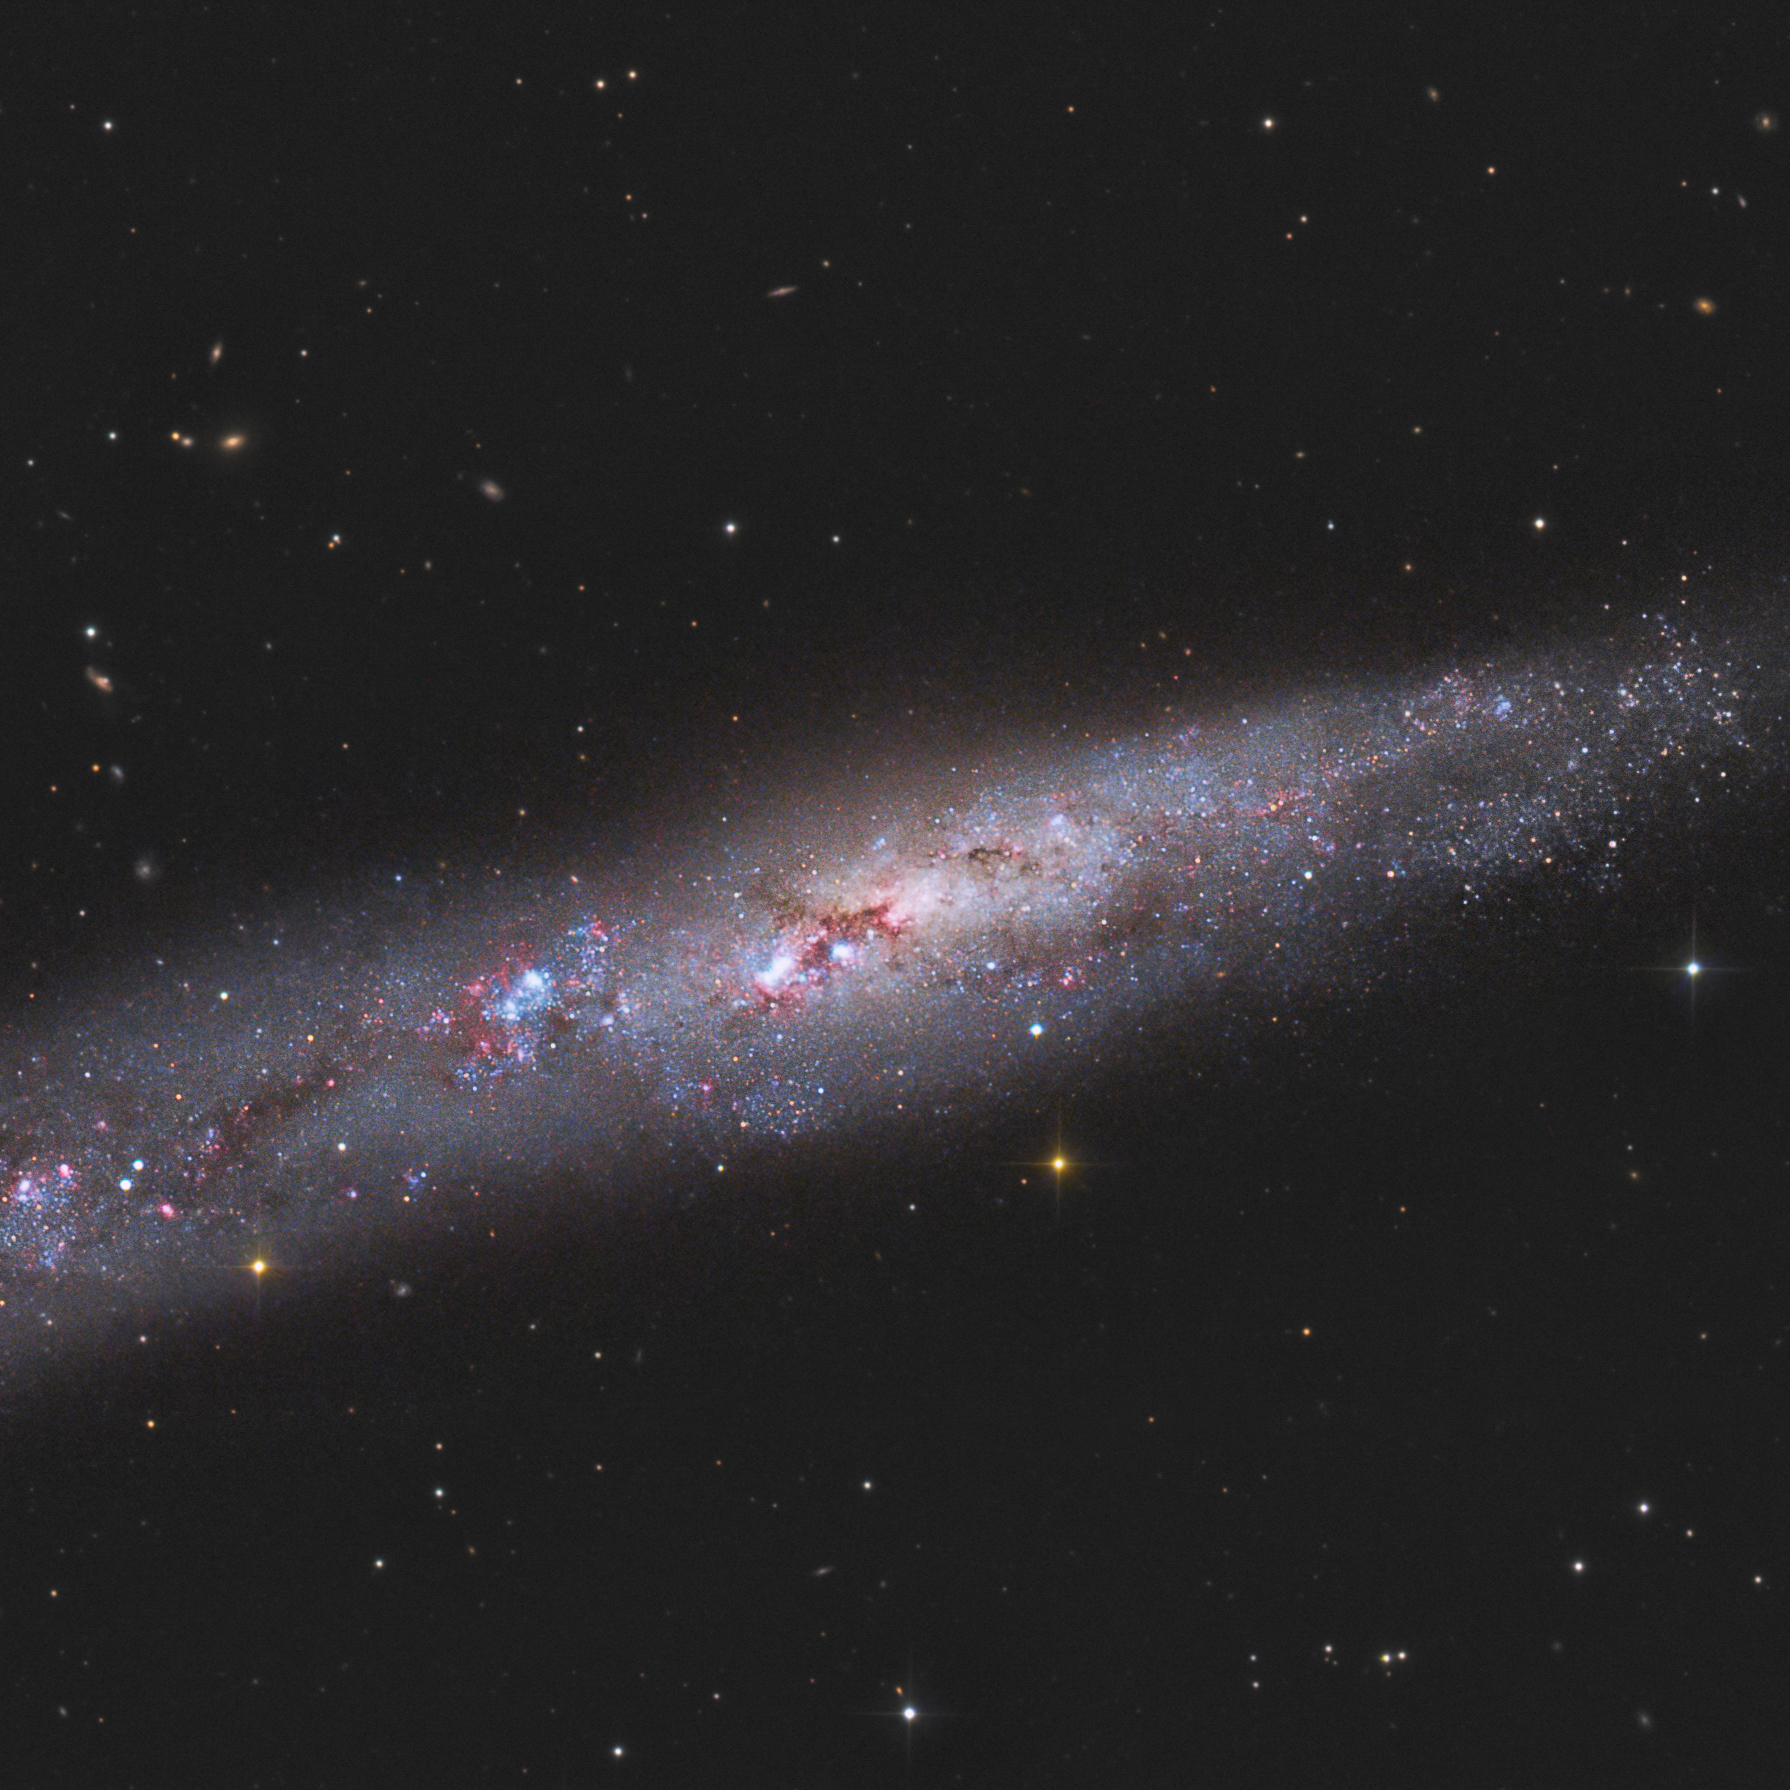 The Whale Galaxy - NGC 55